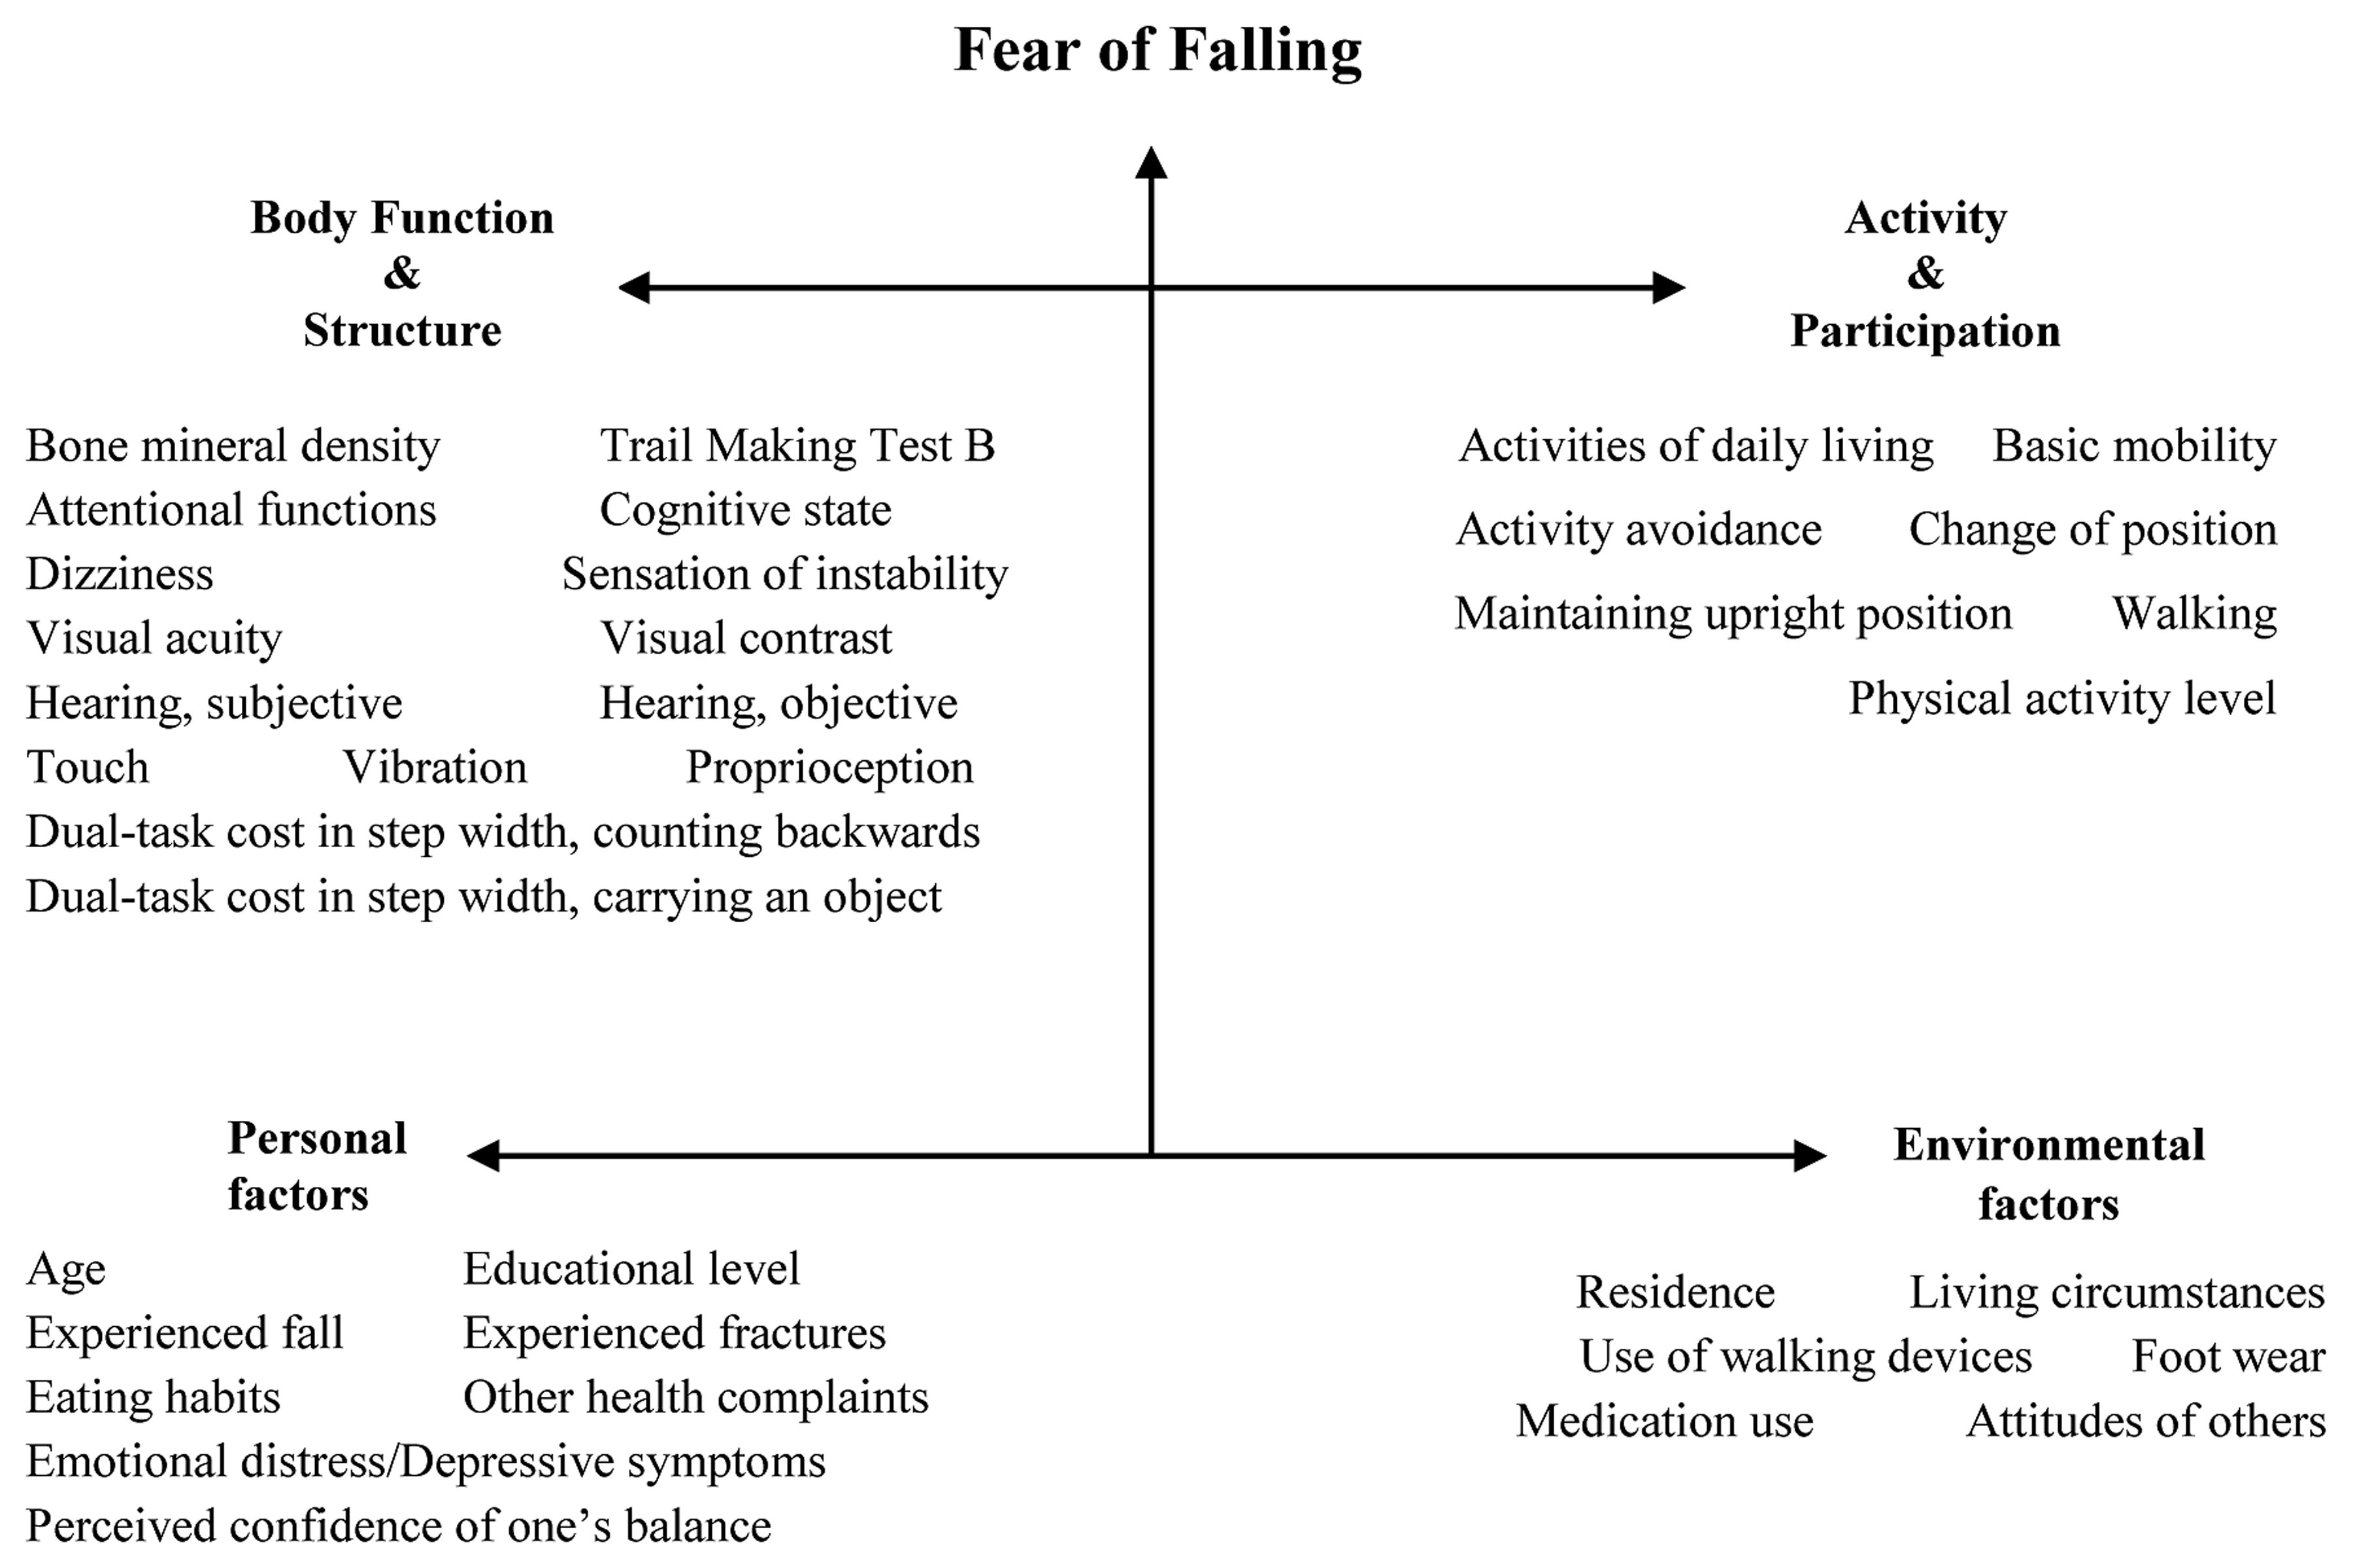 Figure 1. All fall risk factors organized in the model of International Classification of Functioning, Disability and Health (n = 44).